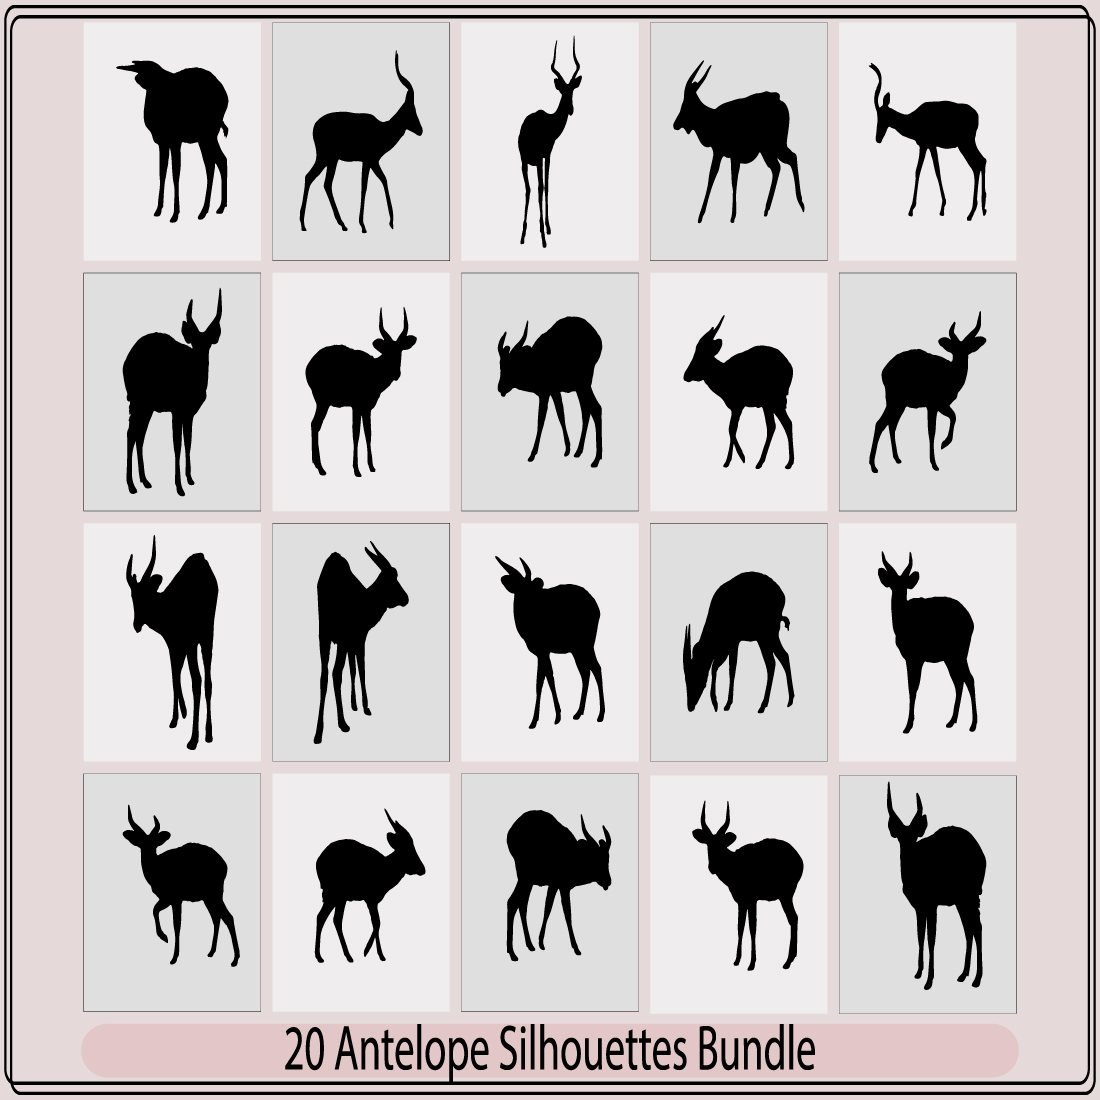 African antelope silhouette,Vector jump antelope silhouette,Black silhouette of an antelope,silhouettes of running impala antelopes, preview image.